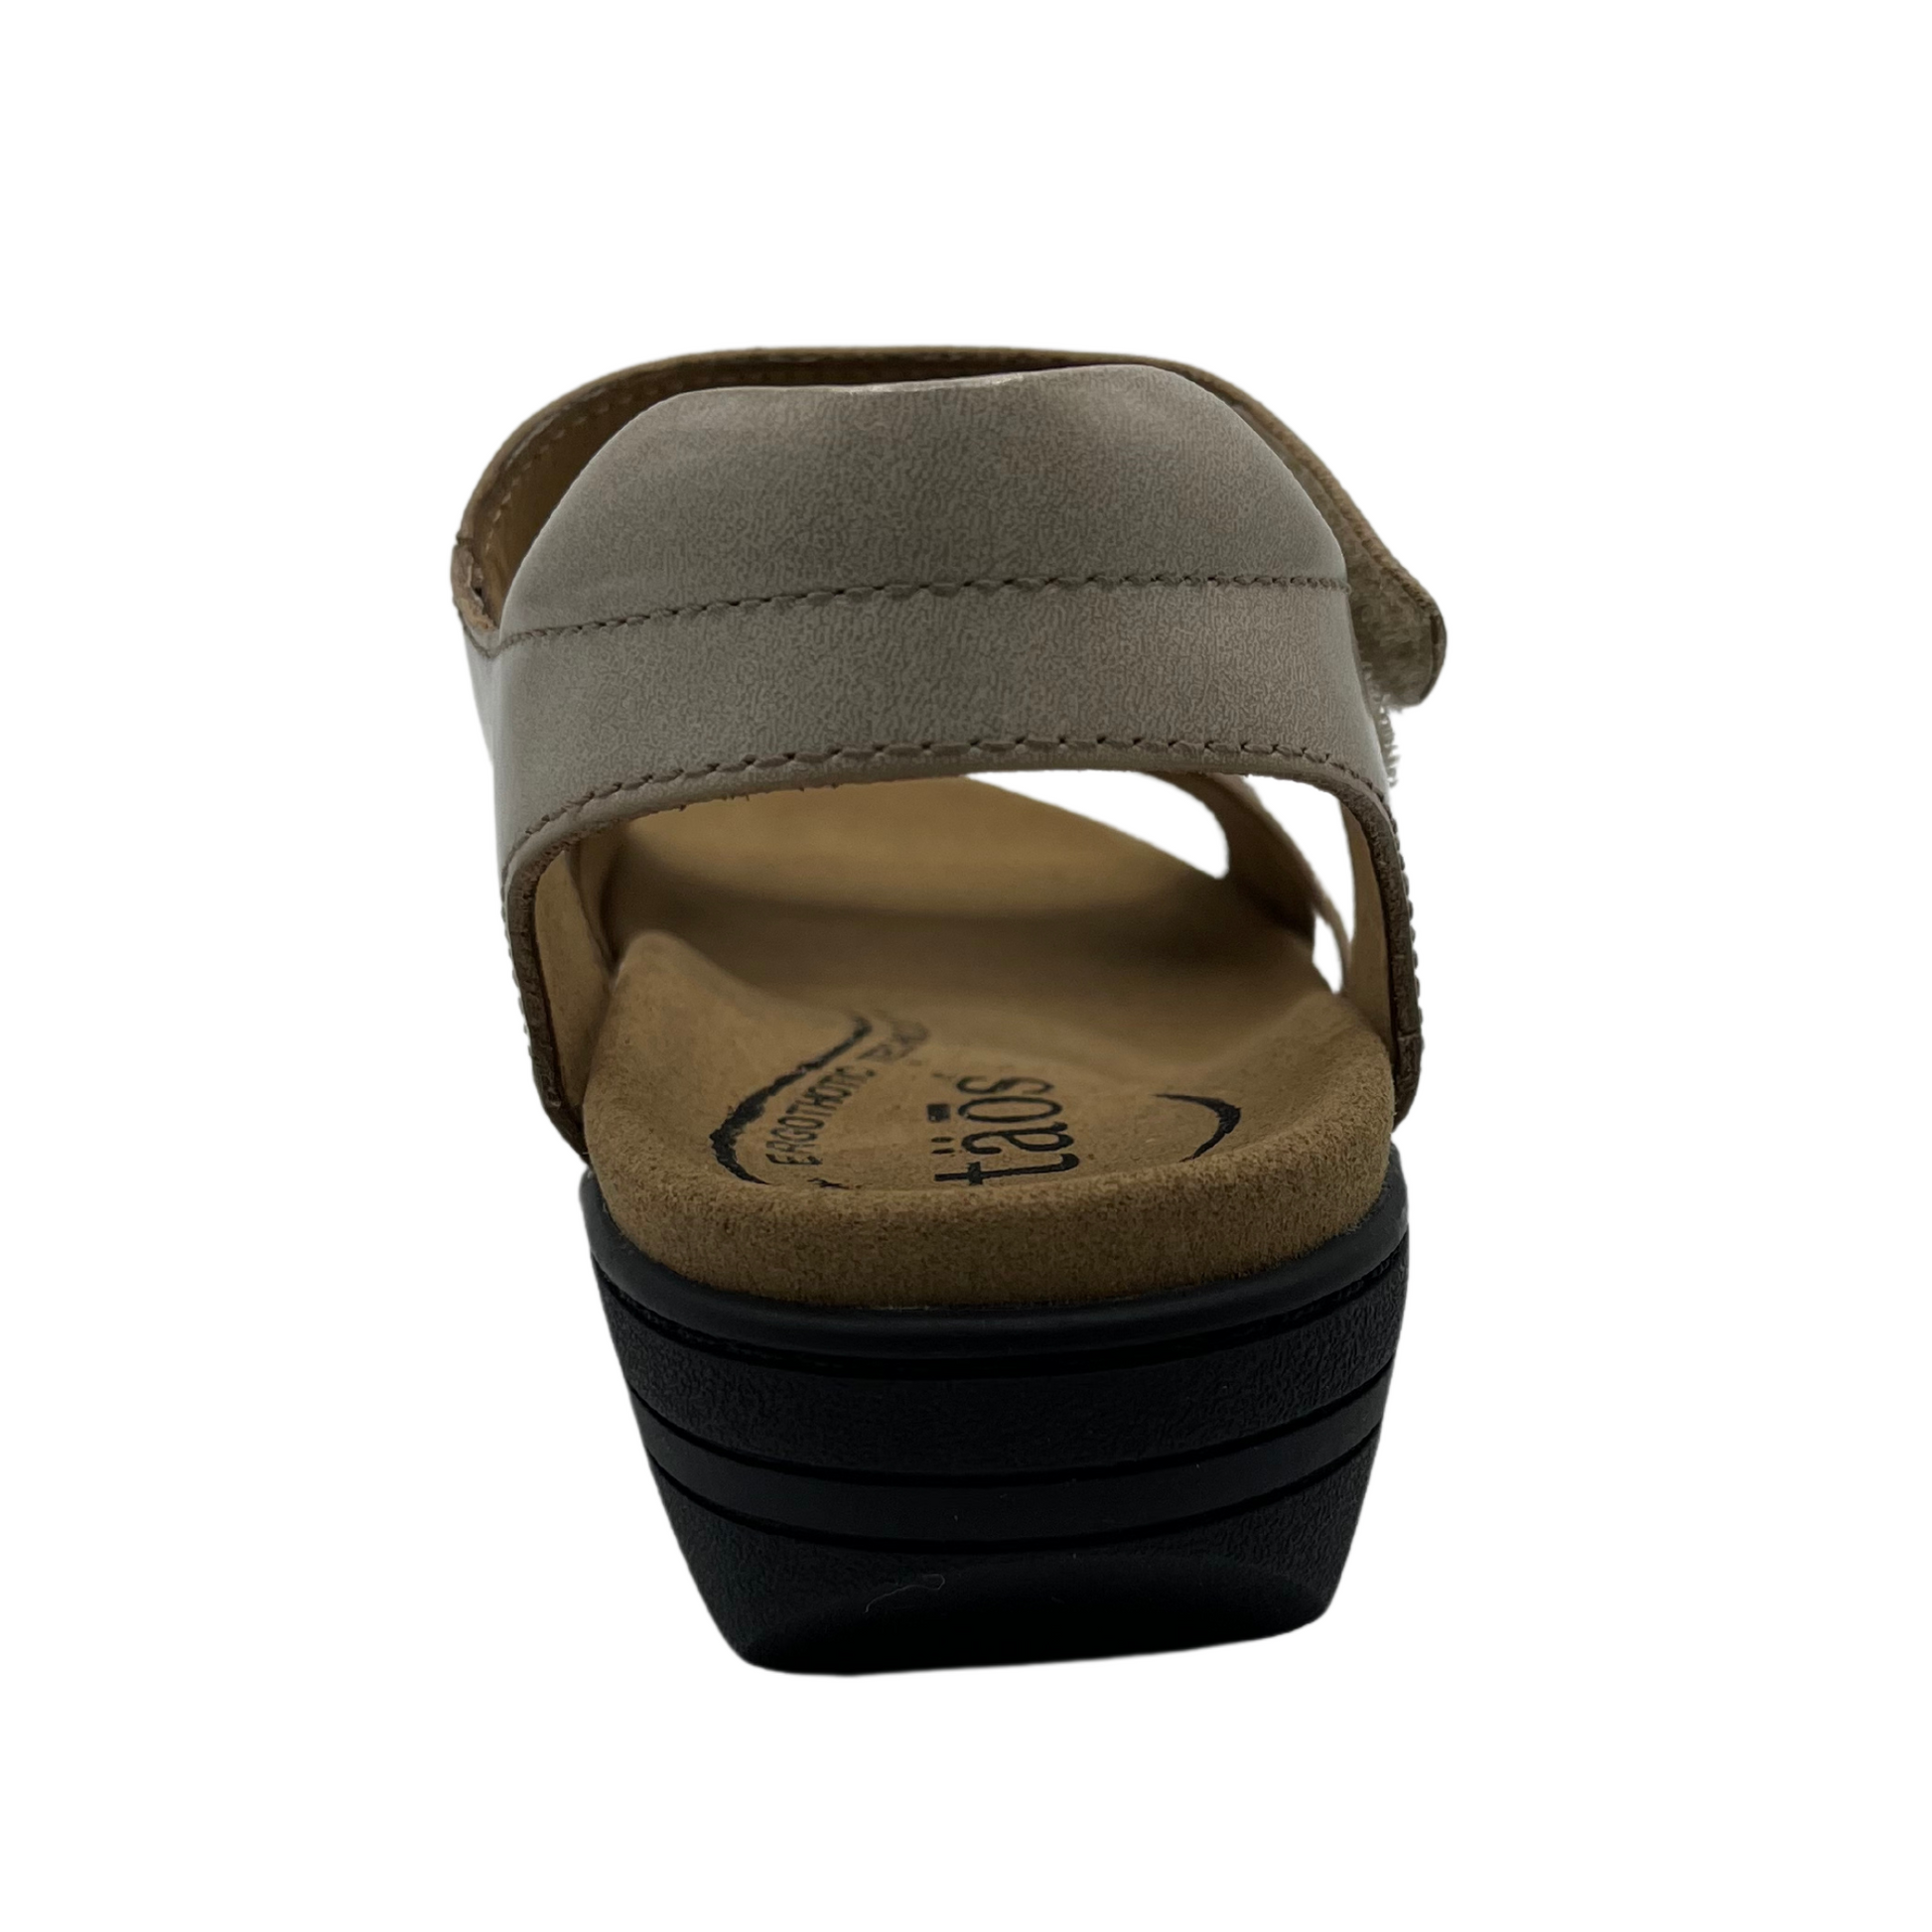 Back view of leather sandals with hook and loop closure straps, cushioned collar and leather lined footbed.